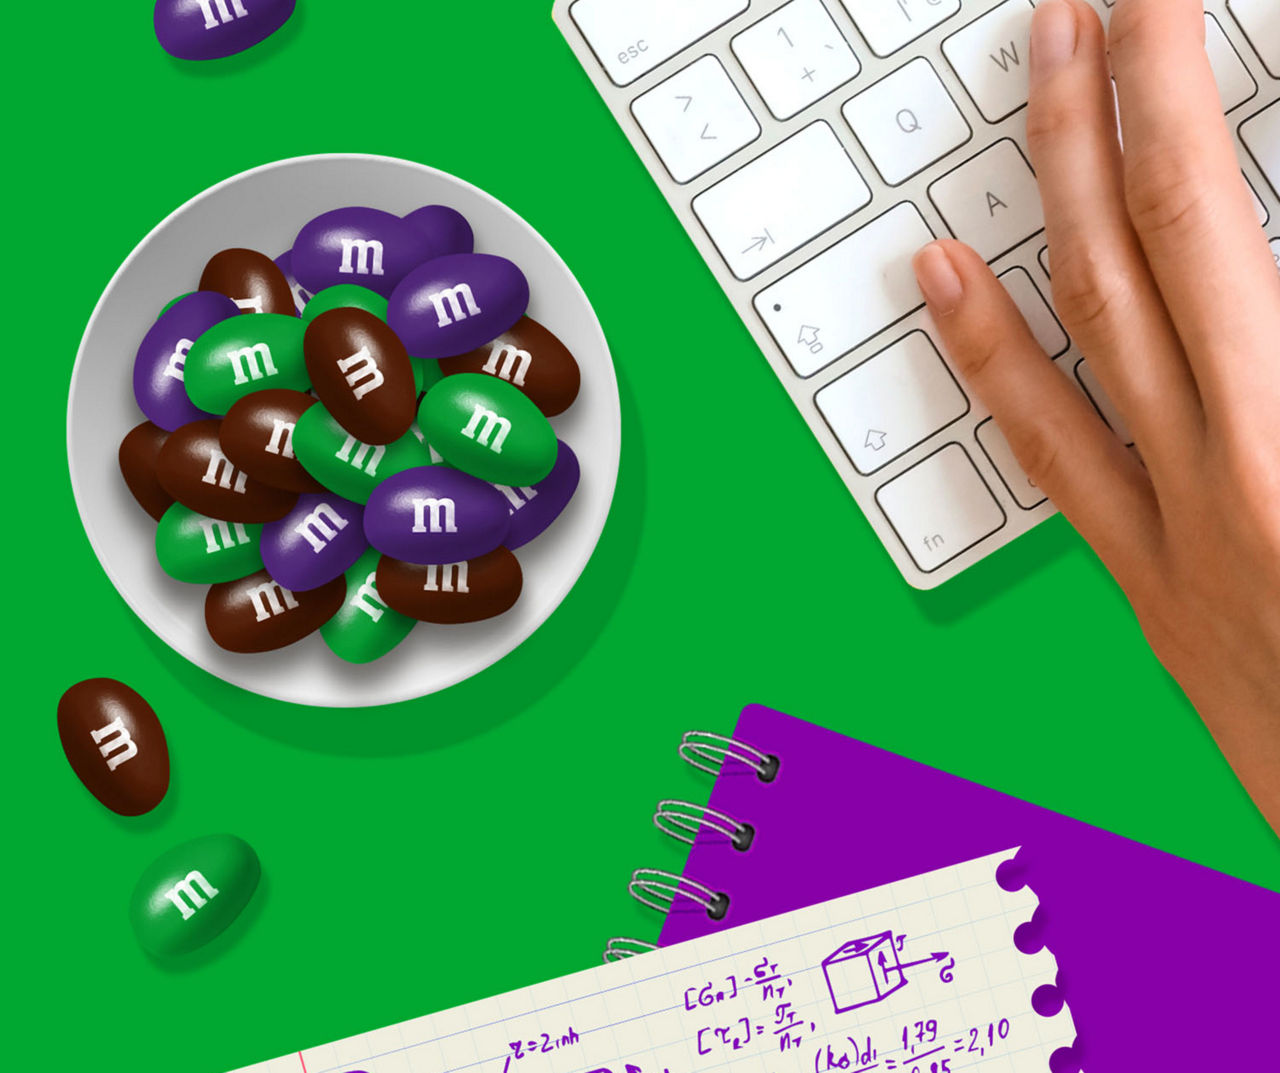 M&M'S Limited Edition Peanut Milk Chocolate Candy featuring Purple Candy Bag,  1.74 oz - Fry's Food Stores